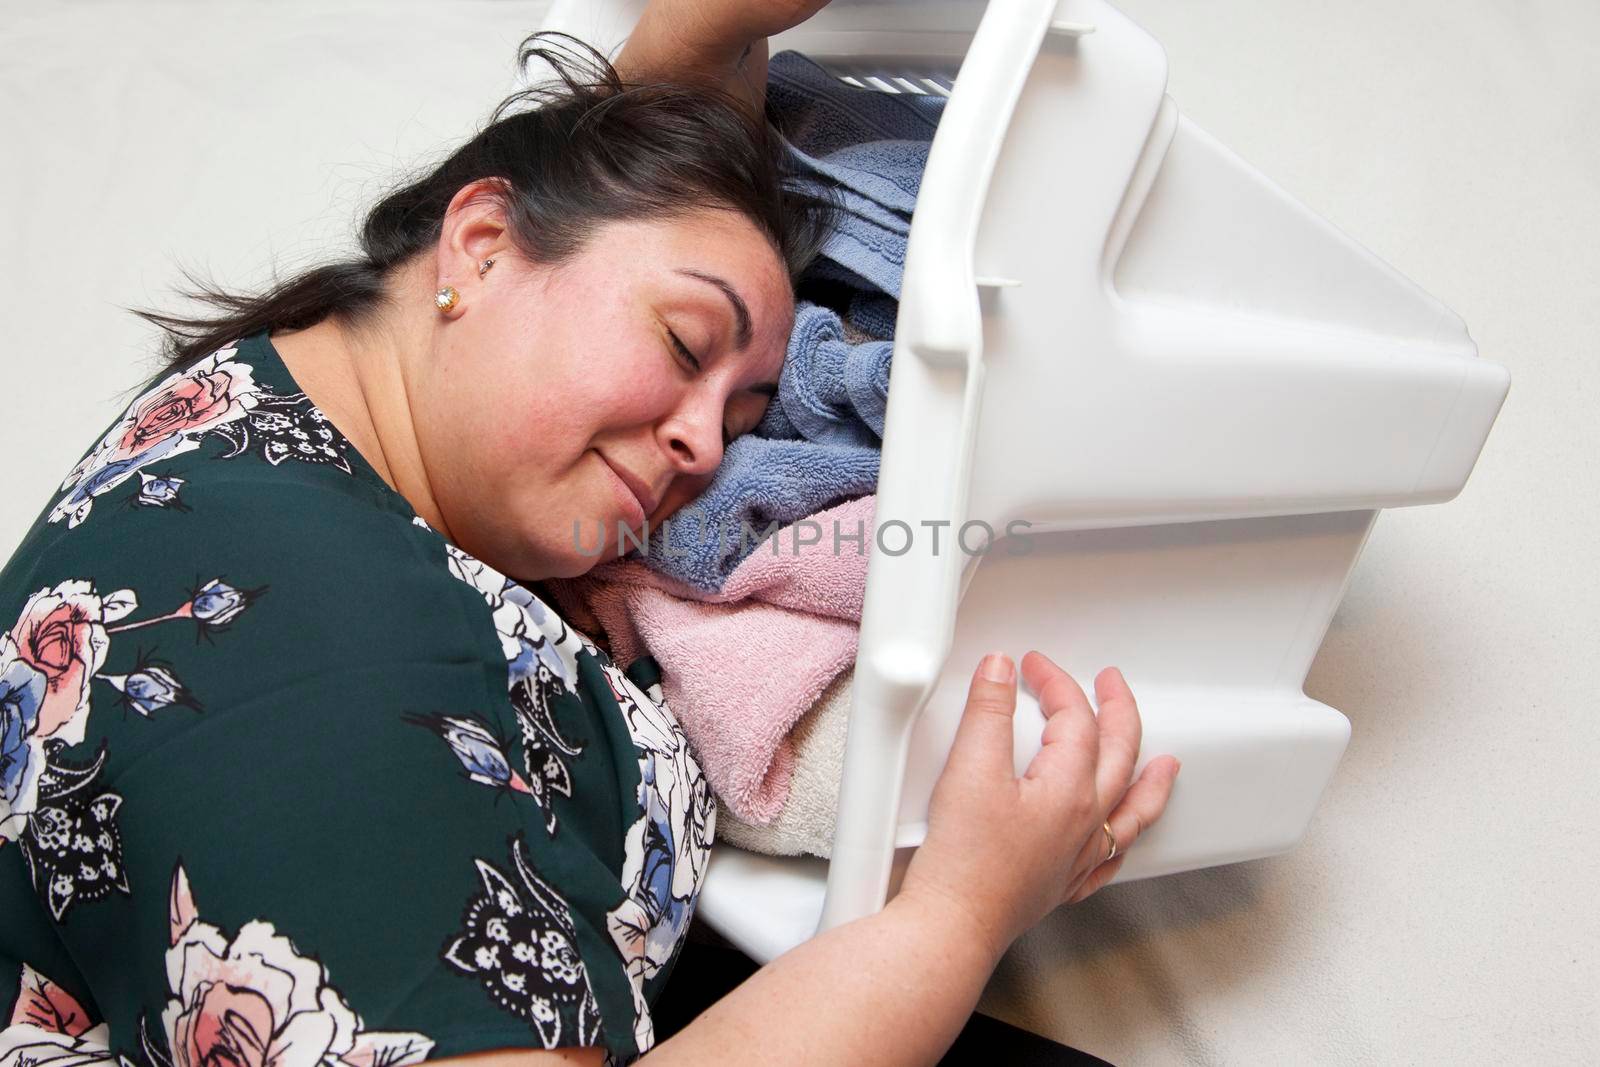 Exhausted but content woman has fallen asleep with a smile into her laundry pile